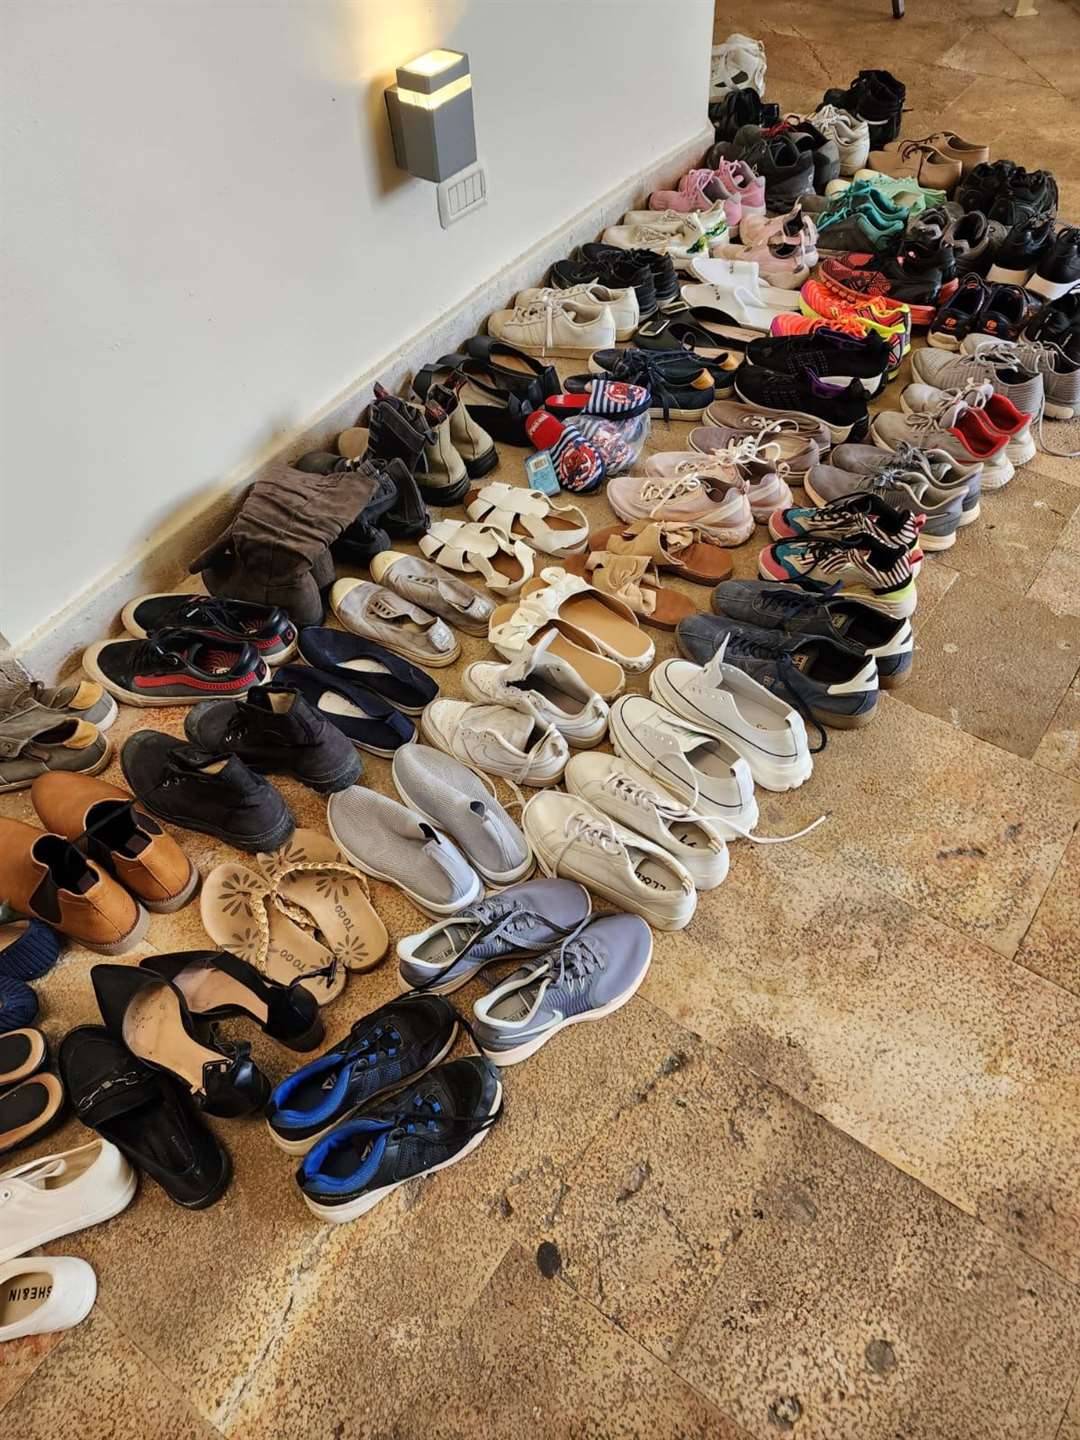 Clothing and shoes have been donated to those sheltering at the hotel on the Dead Sea (Ben/PA)